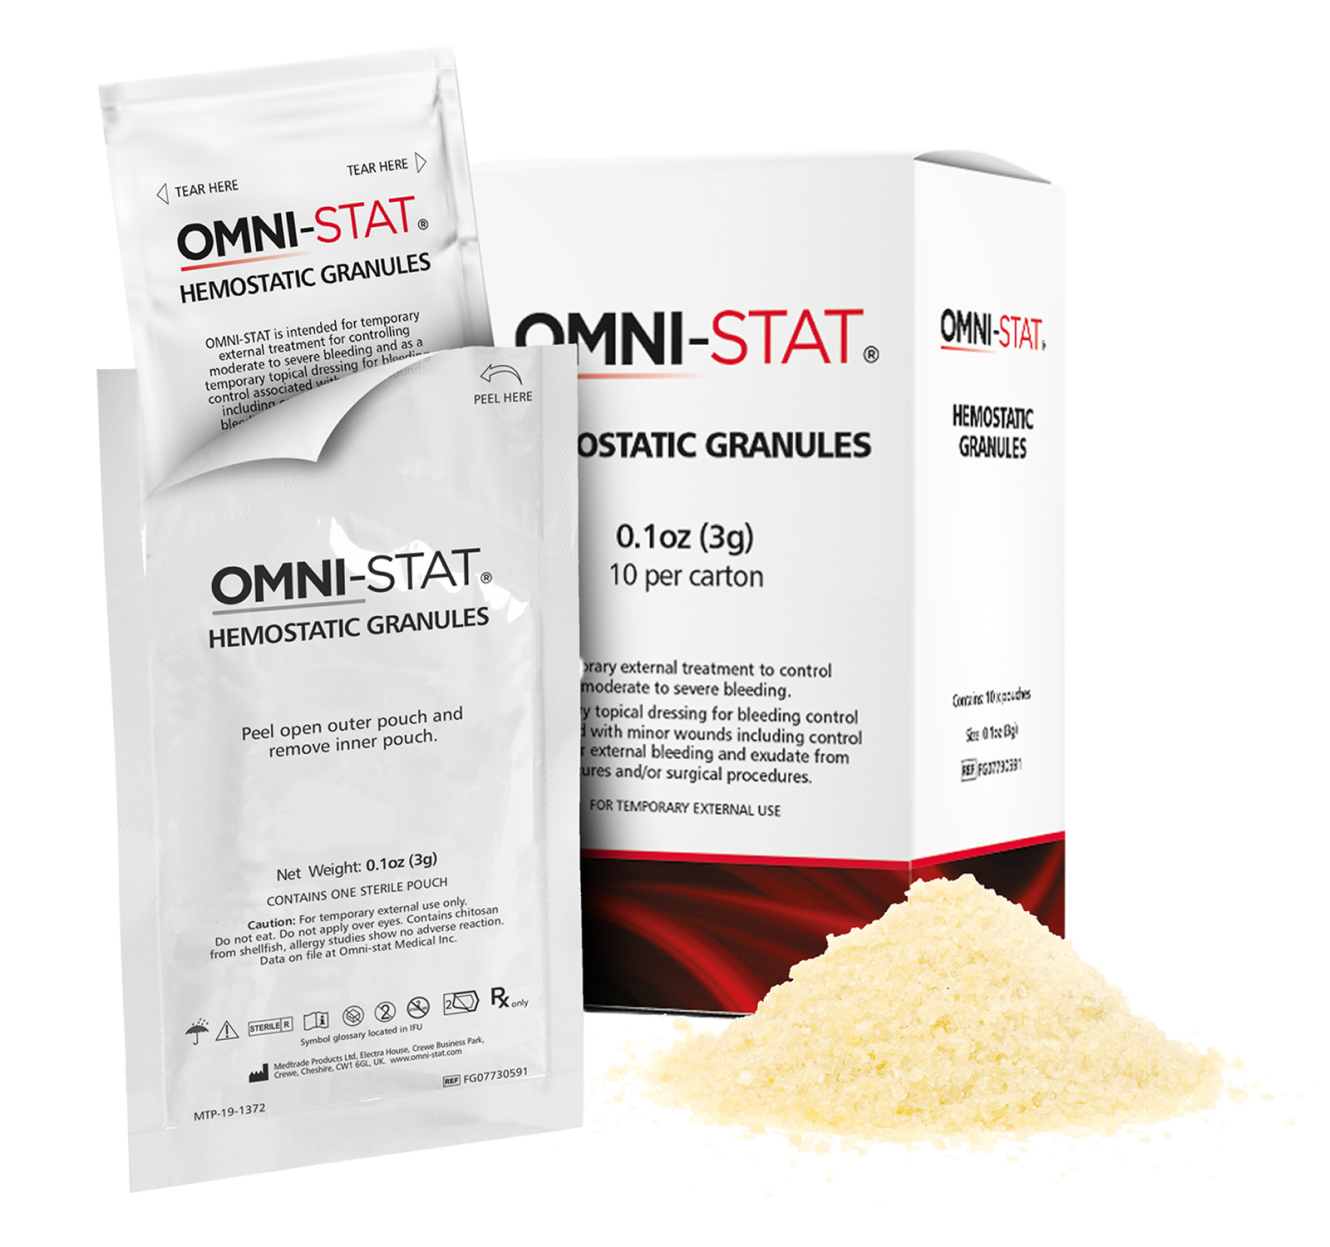 Introducing the NEW OMNI-STAT® 3g Package Design